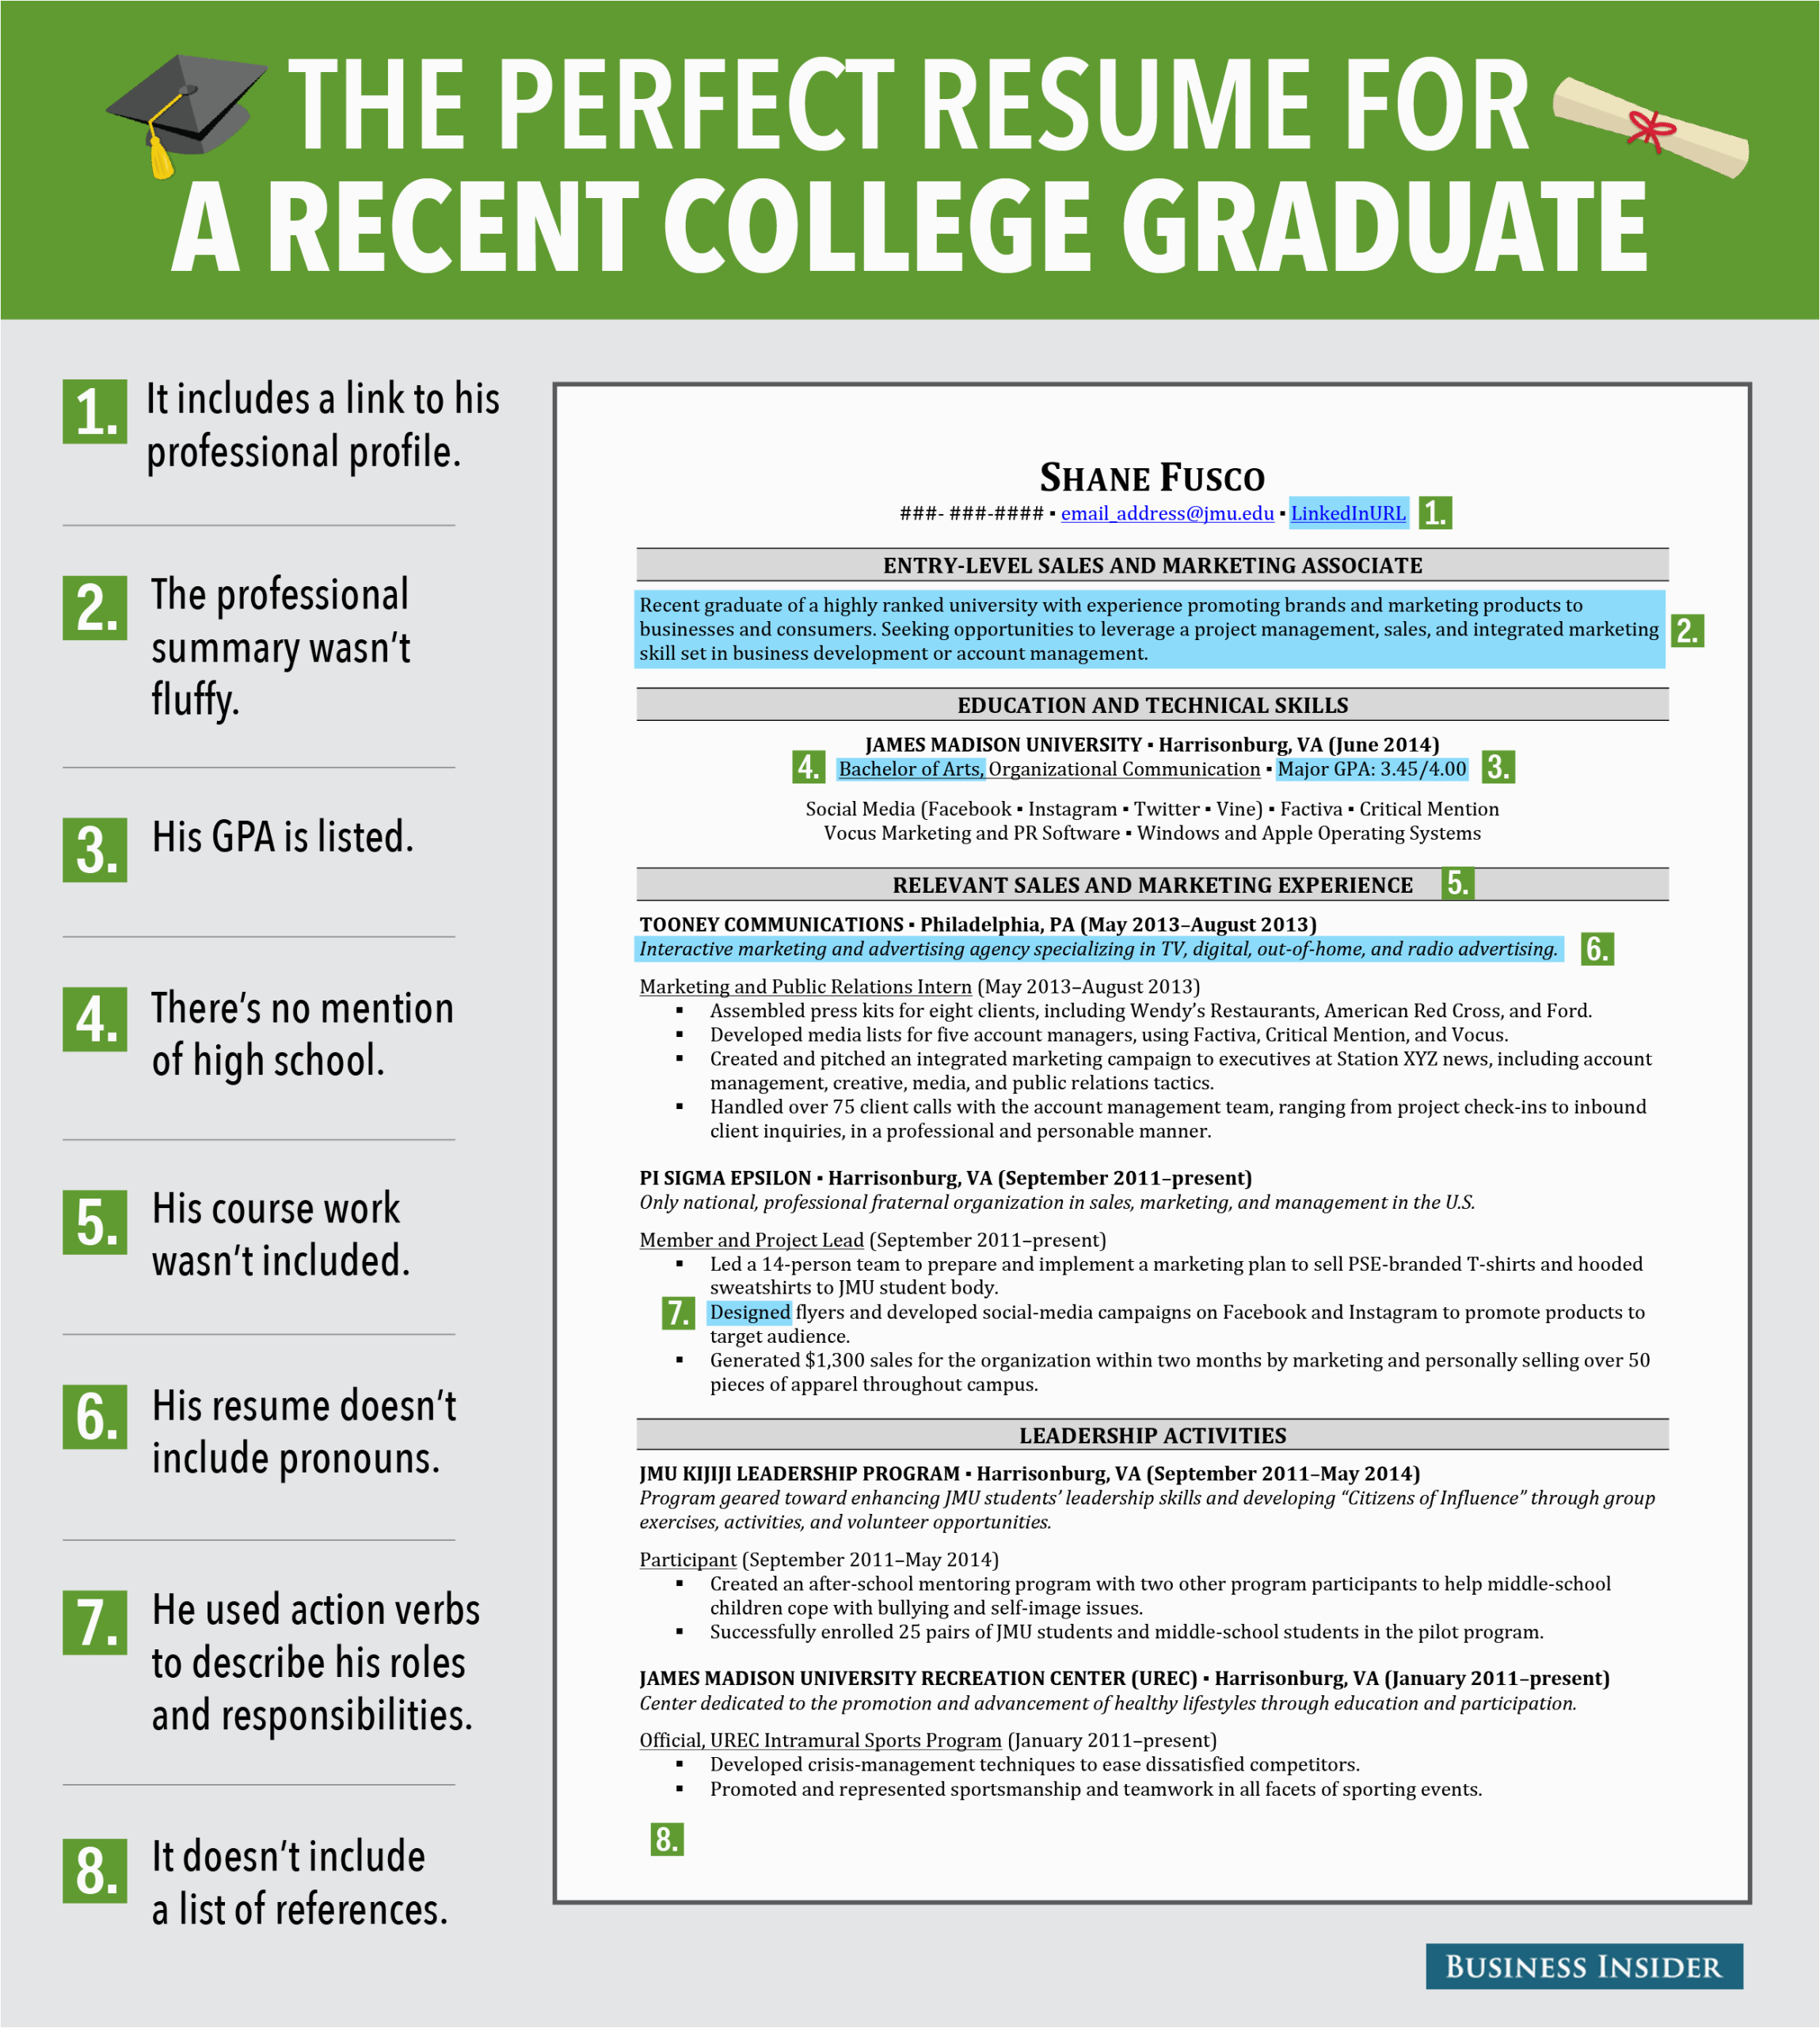 Sample Resumes for Graphic Design Recent Graduate 8 Reasons This is An Excellent Resume for A Recent College Graduate